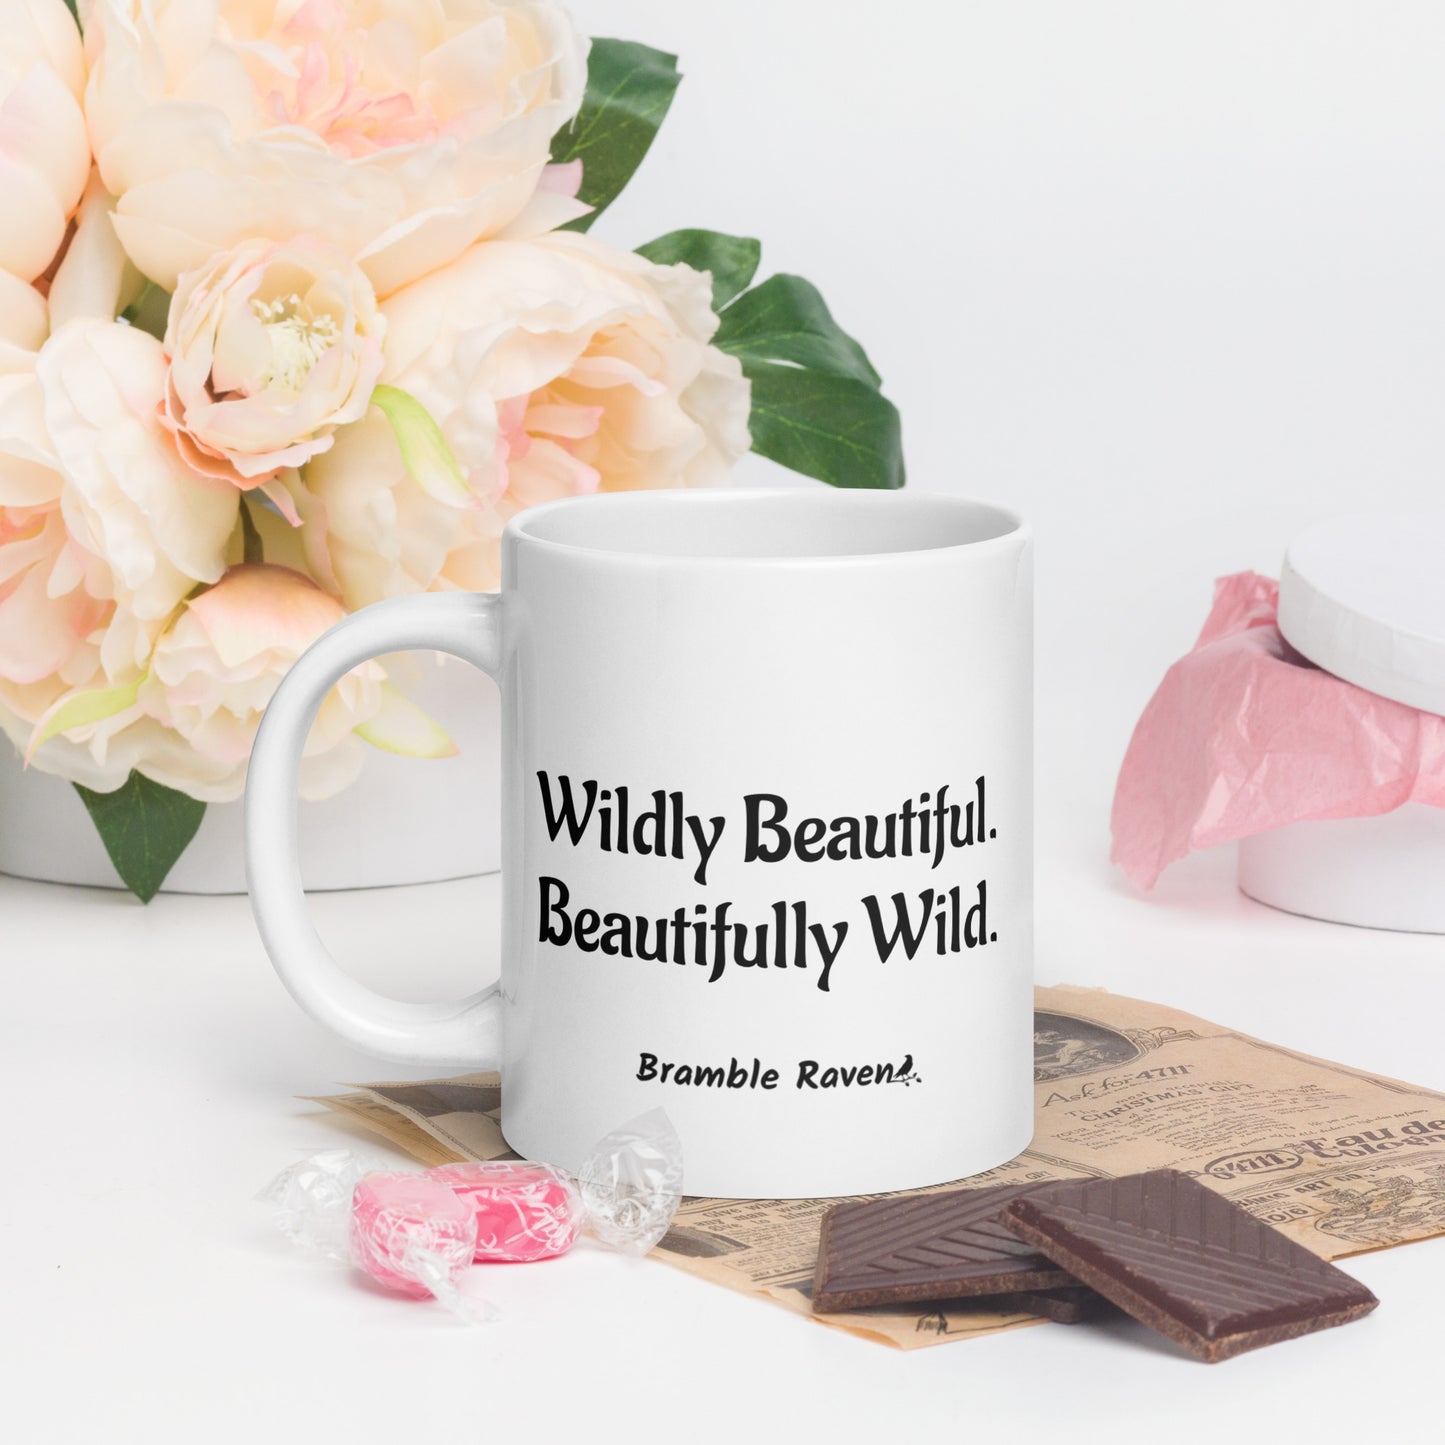 20 ounce white ceramic mug. Features hand-illustrated deer skull wreathed in flowers on one side, and text wildy beautiful, beautifully wild on the other side. Shown by flowers and chocolate.